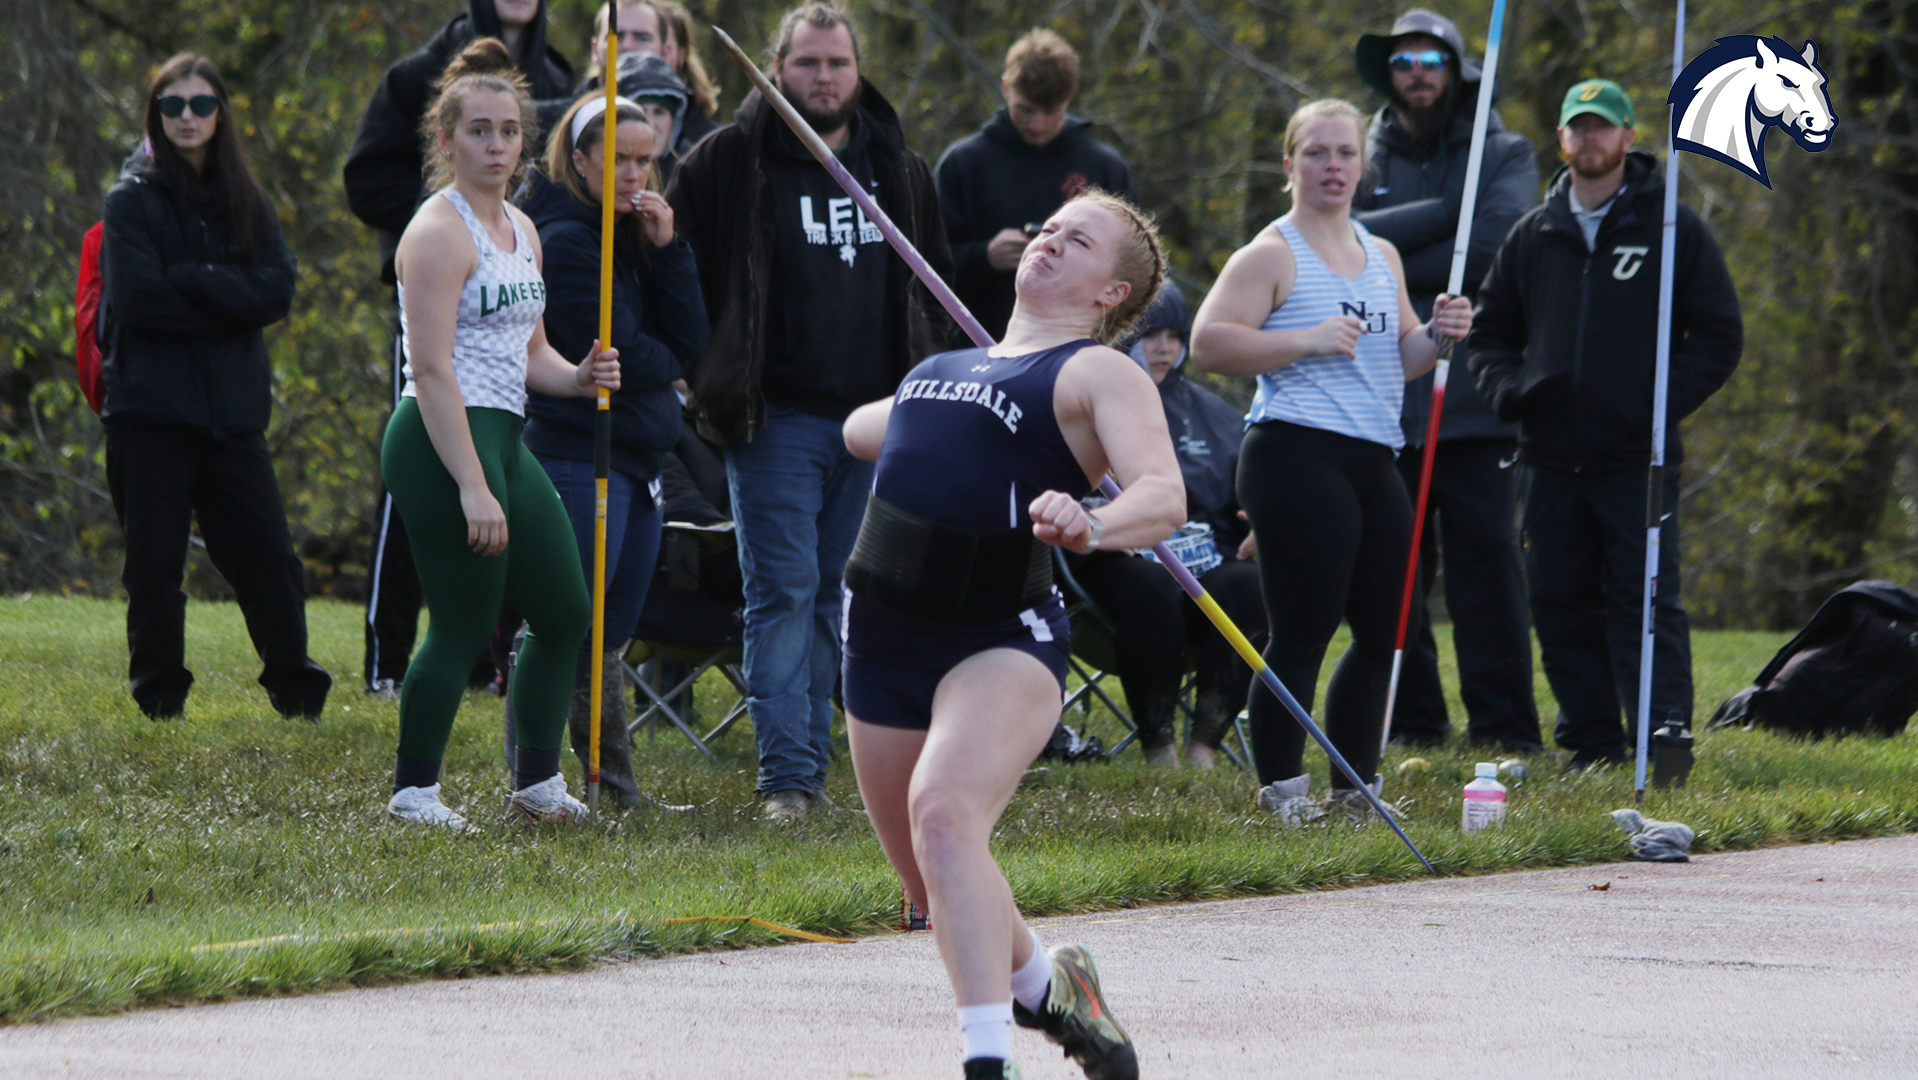 Chargers' Little shatters javelin school record to kick off Last Chance Week